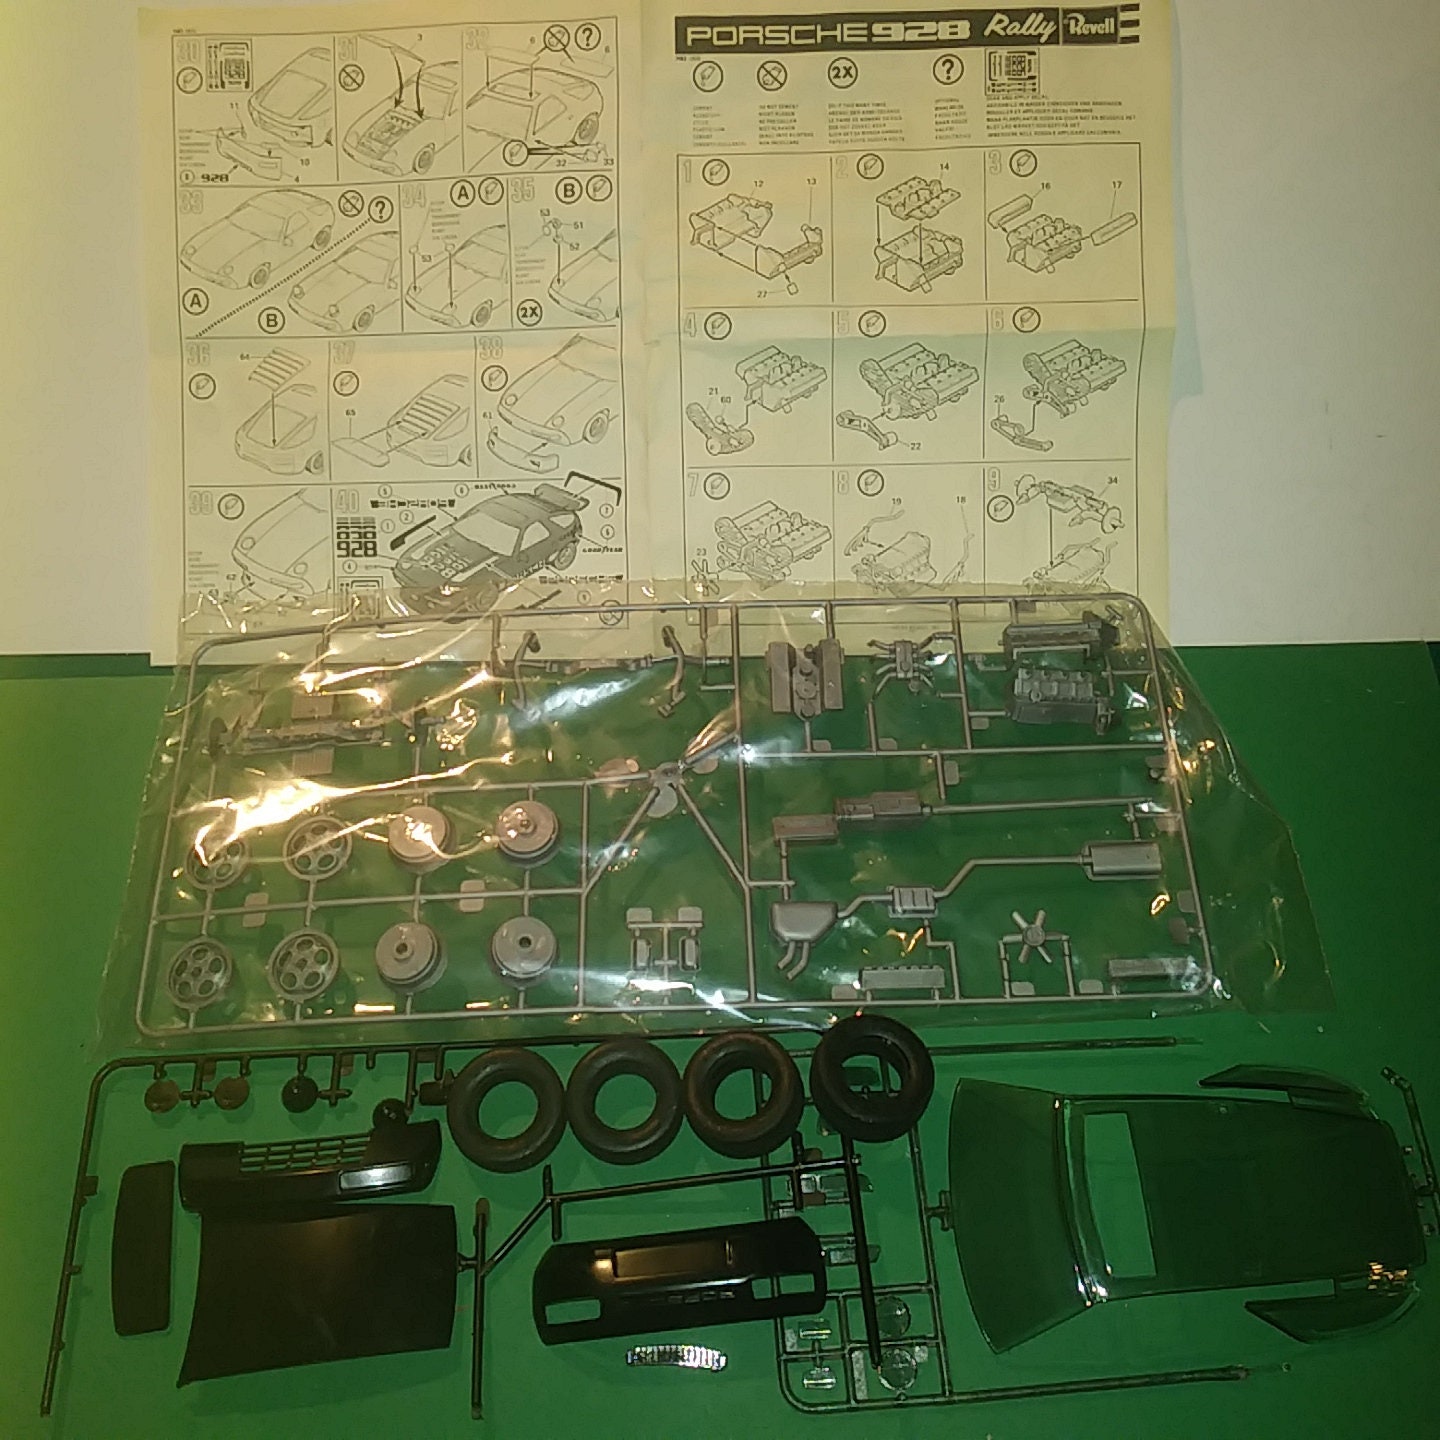 PORSCHE 928 RALLY 1980, Revell 1/16 Scale 11 Plastic Model Kit 7483,  Vintage New, Mint Condition in Original Bags but NO Box. 